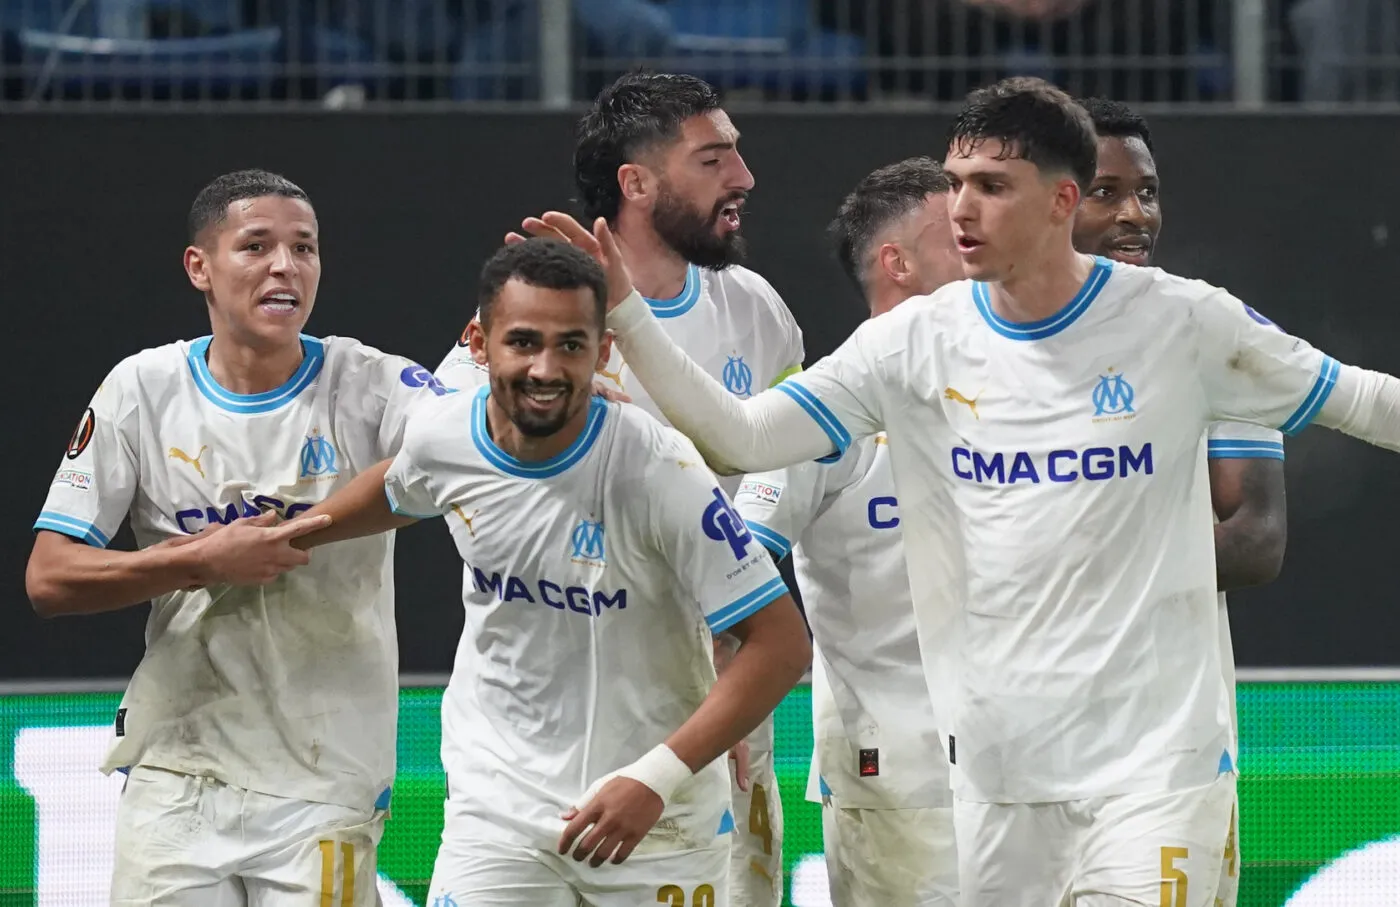 15 February 2024, Hamburg: Soccer: Europa League, knockout round, intermediate round, first leg, Shakhtar Donetsk - Olympique Marseille, at the Volksparkstadion. Marseille's goalscorer Iliman Ndiaye (2nd from left) celebrates with Marseille's Amine Harit (l) and Marseille's Leonardo Balerdi (r) after scoring to make it 1-2. Photo: Marcus Brandt/dpa   - Photo by Icon Sport   - Photo by Icon Sport